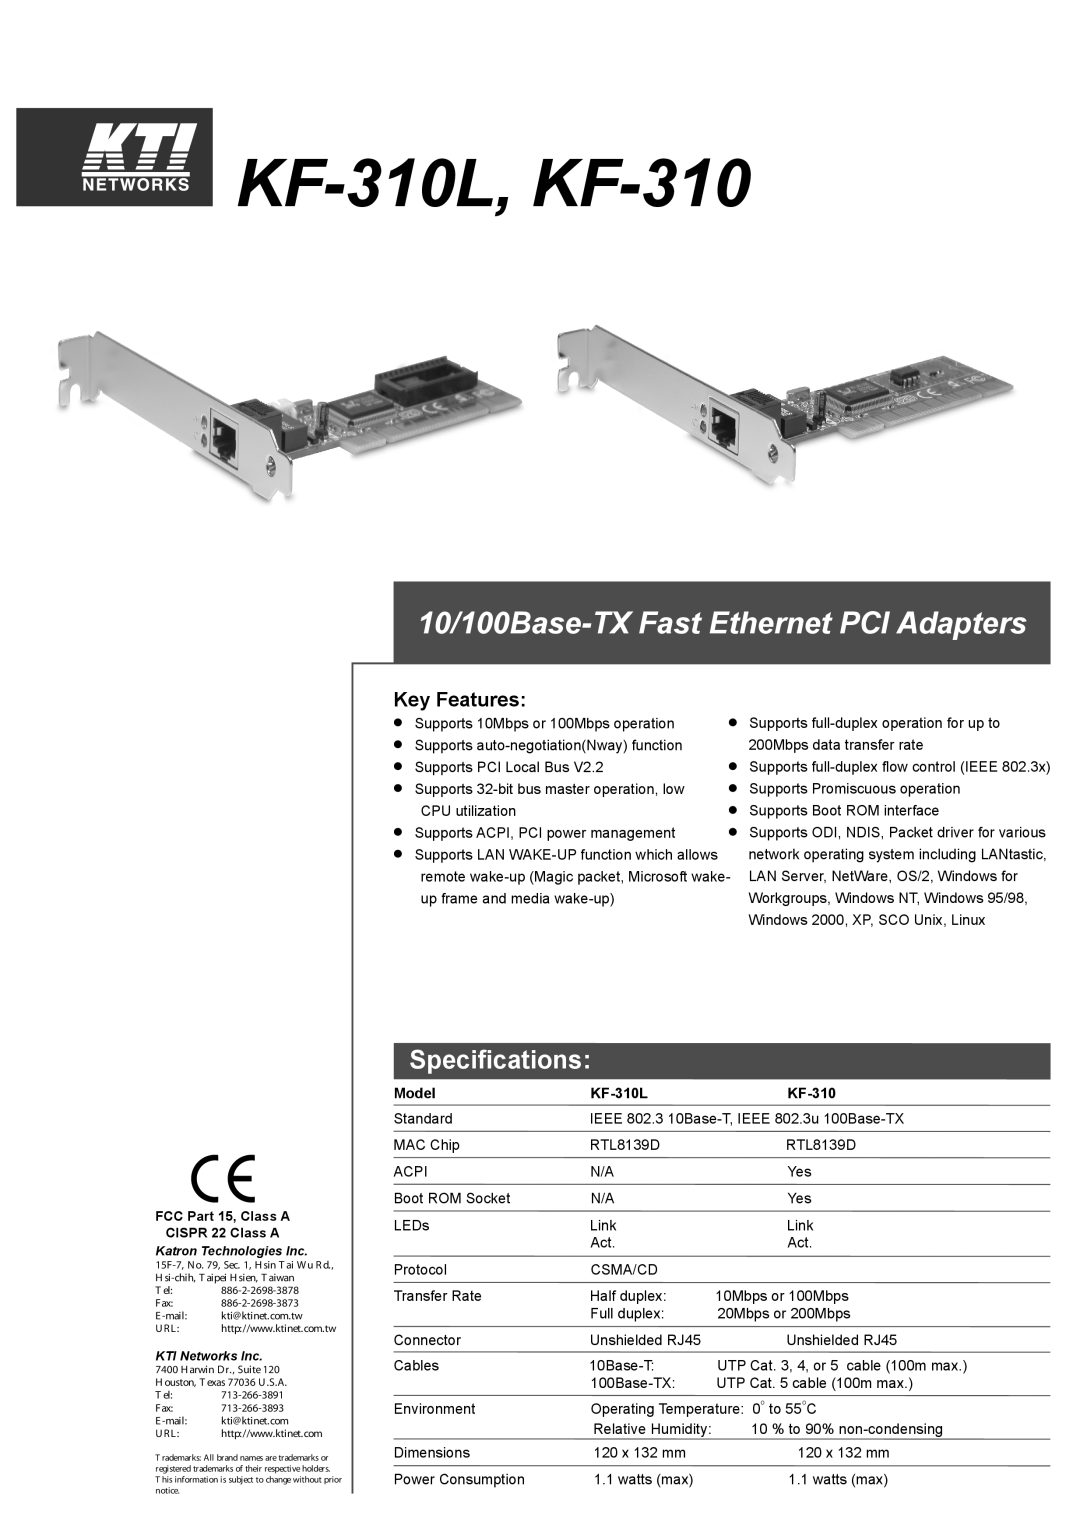 KTI Networks specifications KF-310L, KF-310, 10/100Base-TX Fast Ethernet PCI Adapters, Specifications, Key Features 